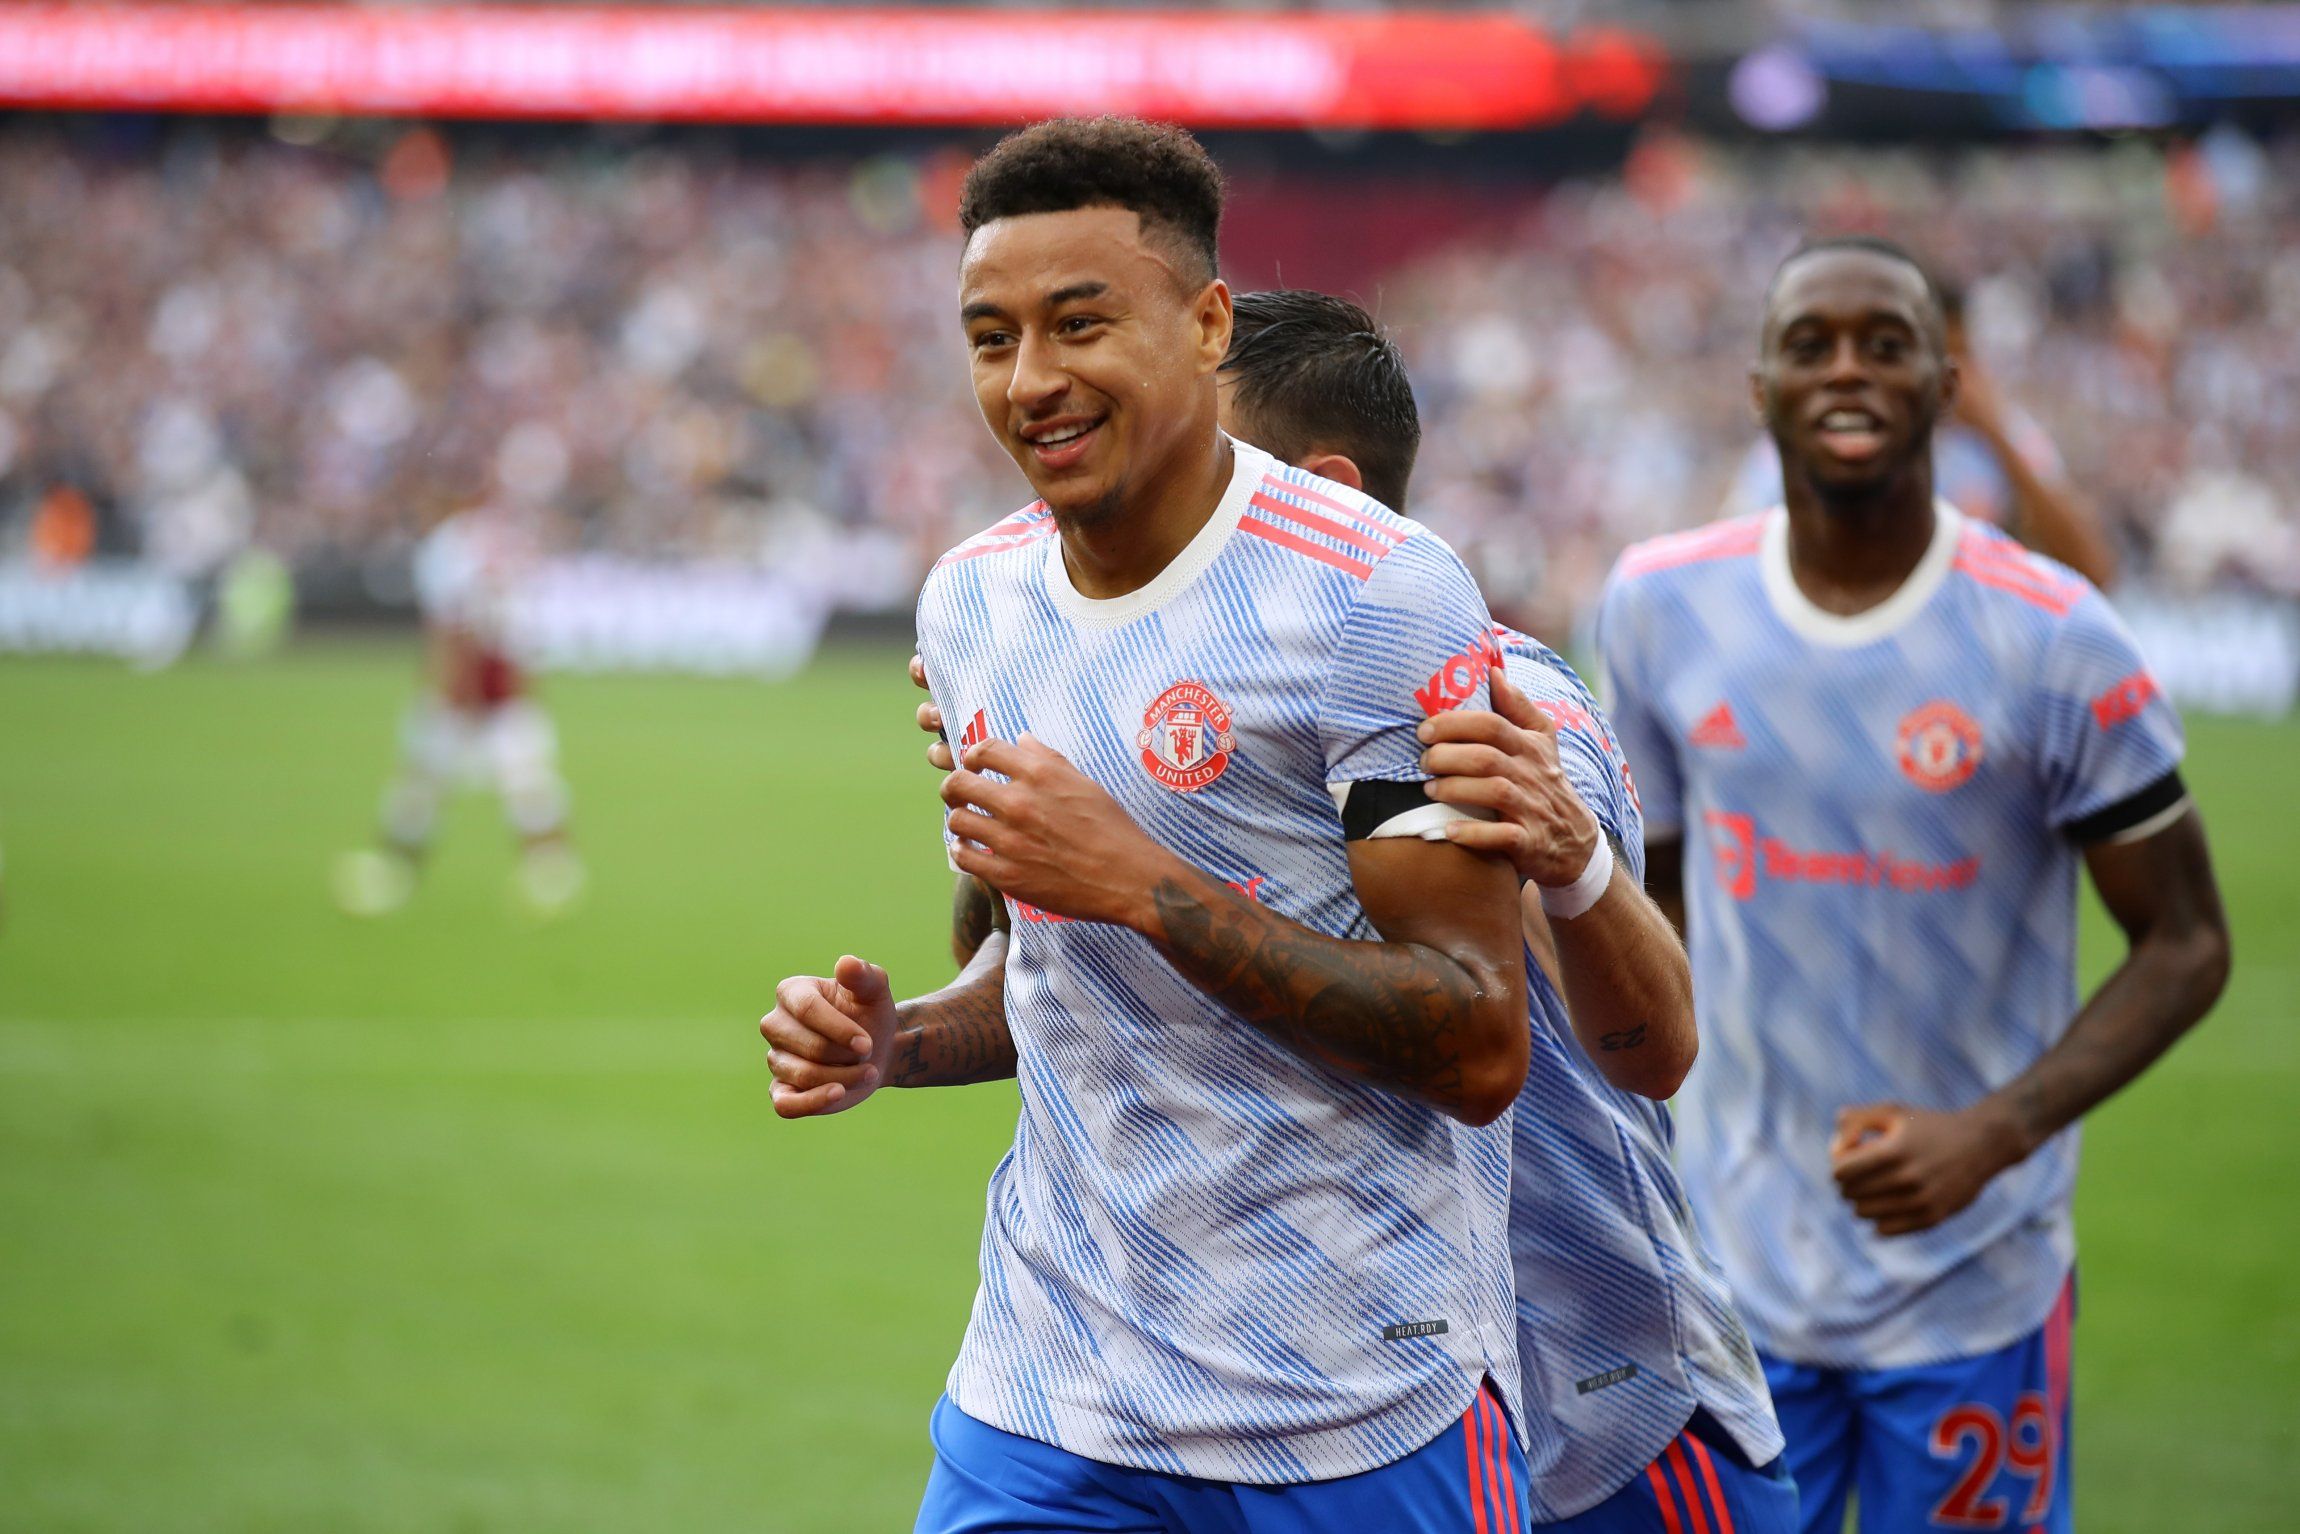 Manchester United forward Jesse Lingard in Premier League action